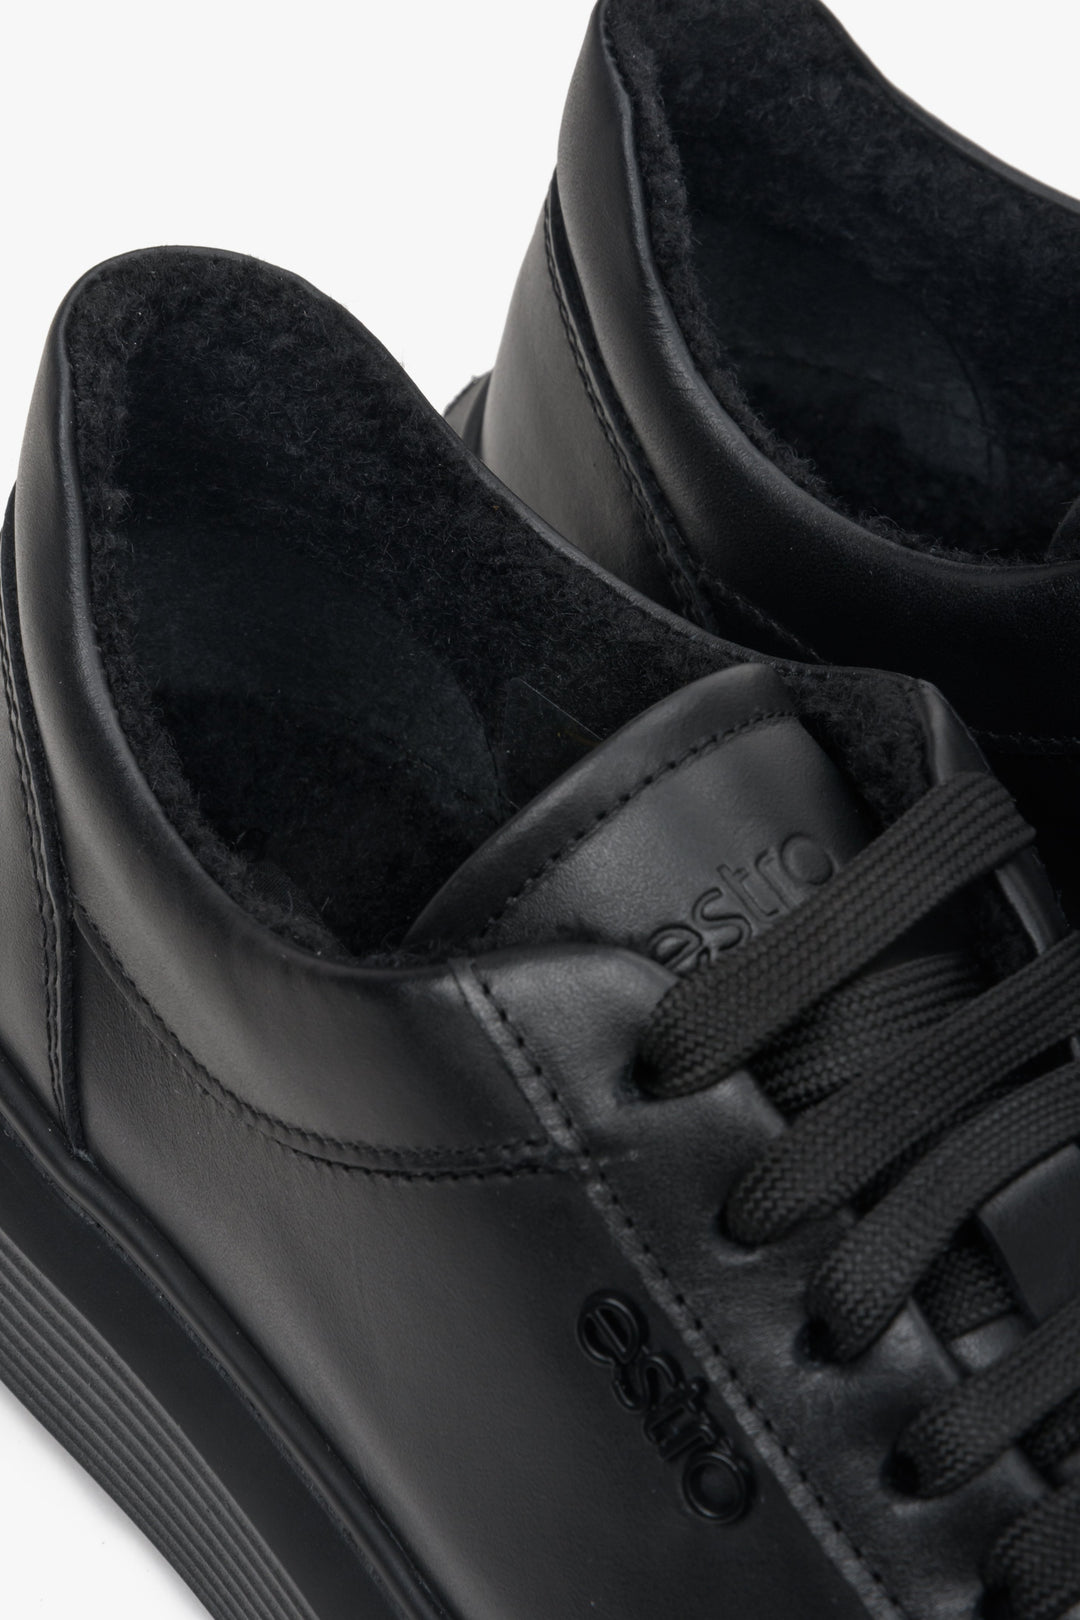 Black, insulated low-top sneakers made of genuine Italian leather - close-up on details.